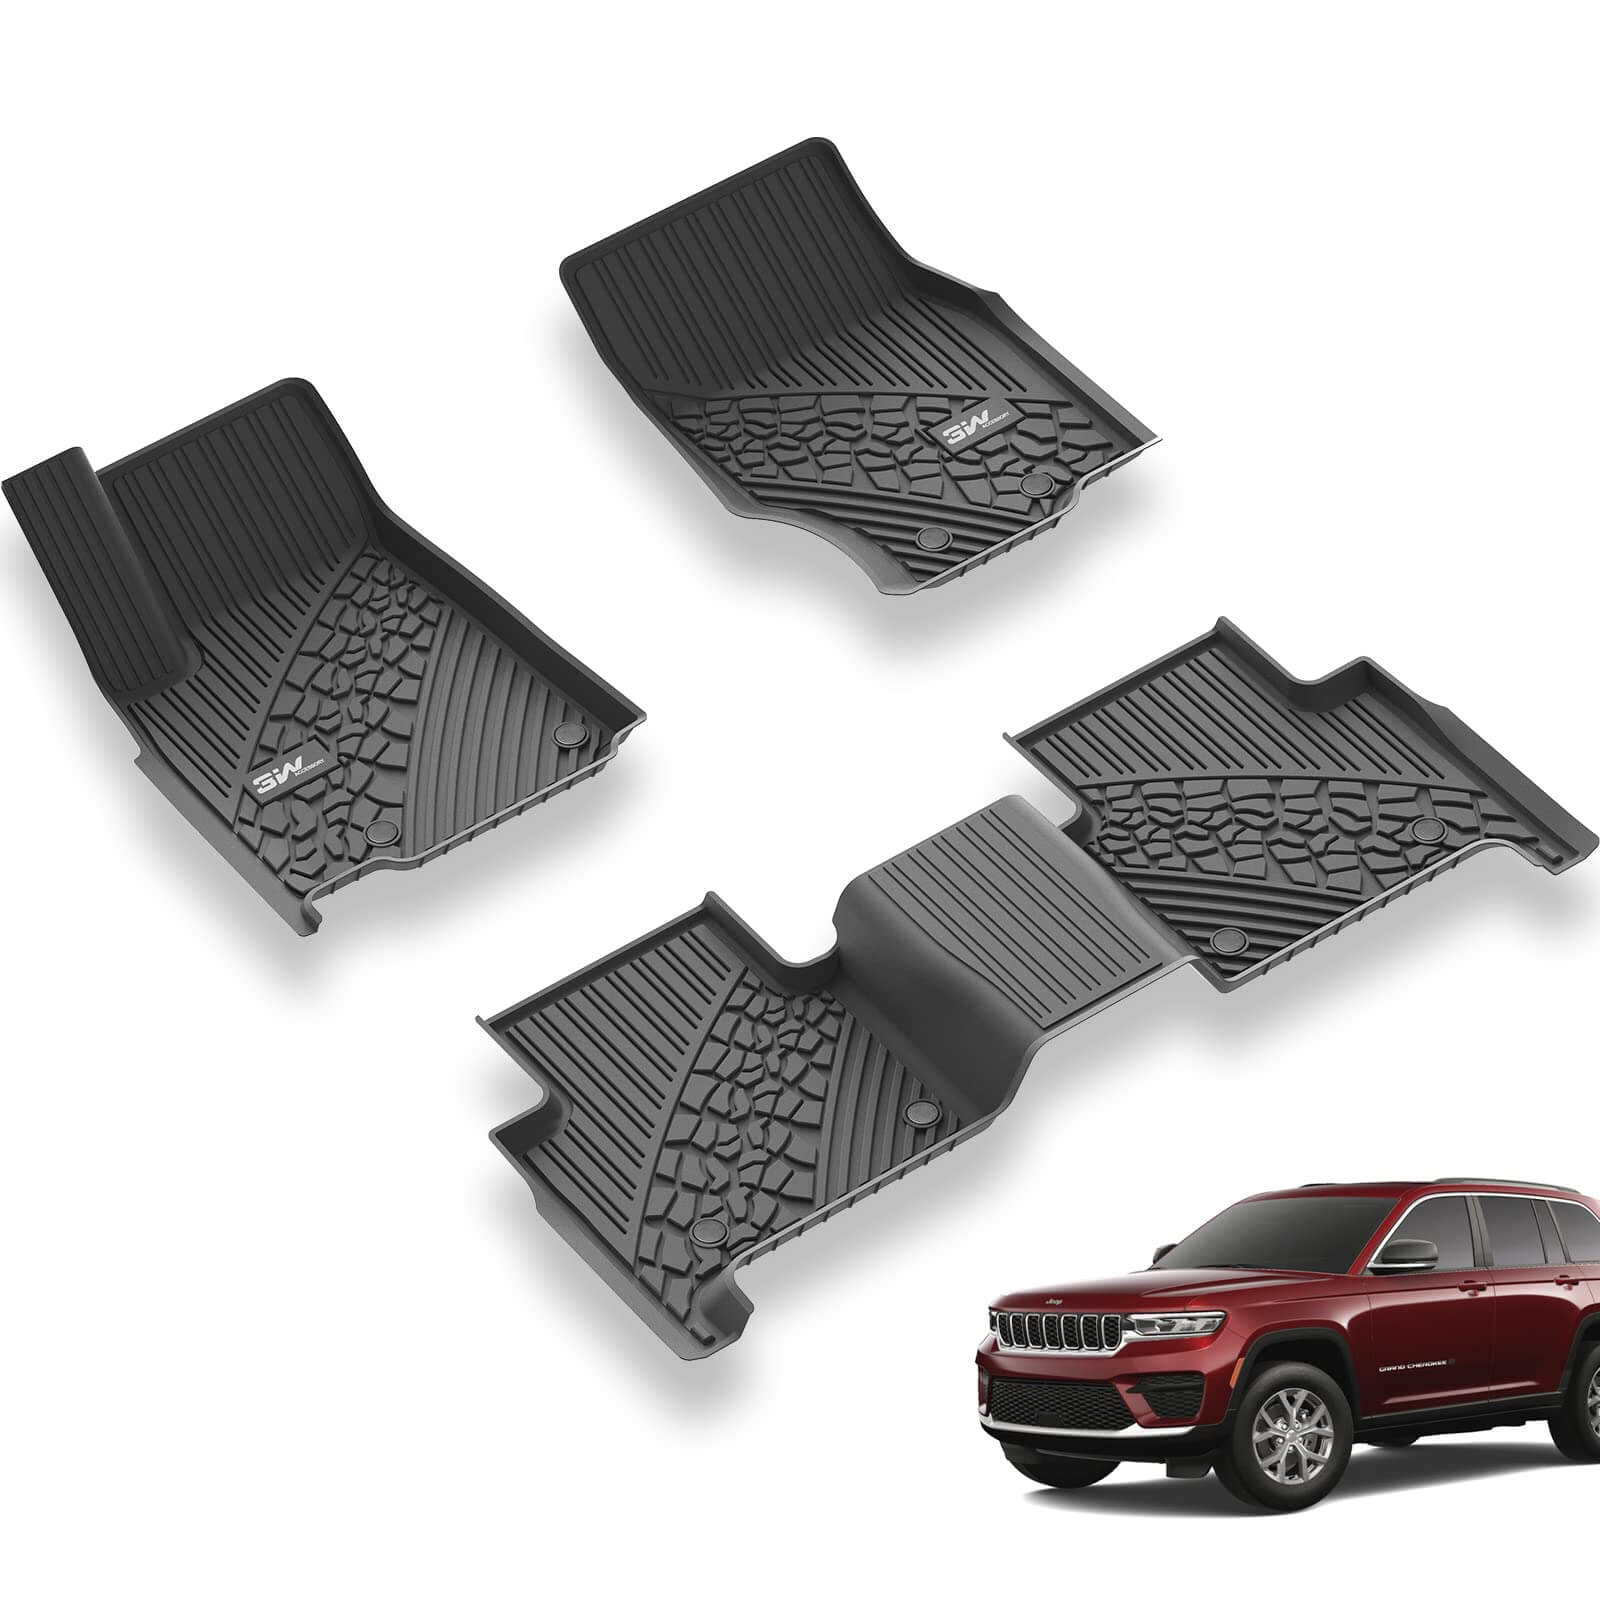 3W Jeep Grand Cherokee 2022-2023 (Non L or WK) Custom Floor Mats / Trunk Mat TPE Material & All-Weather Protection Vehicles & Parts 3Wliners 2022-2023 Grand Cherokee 2022-2023 1st&2nd Row Mats